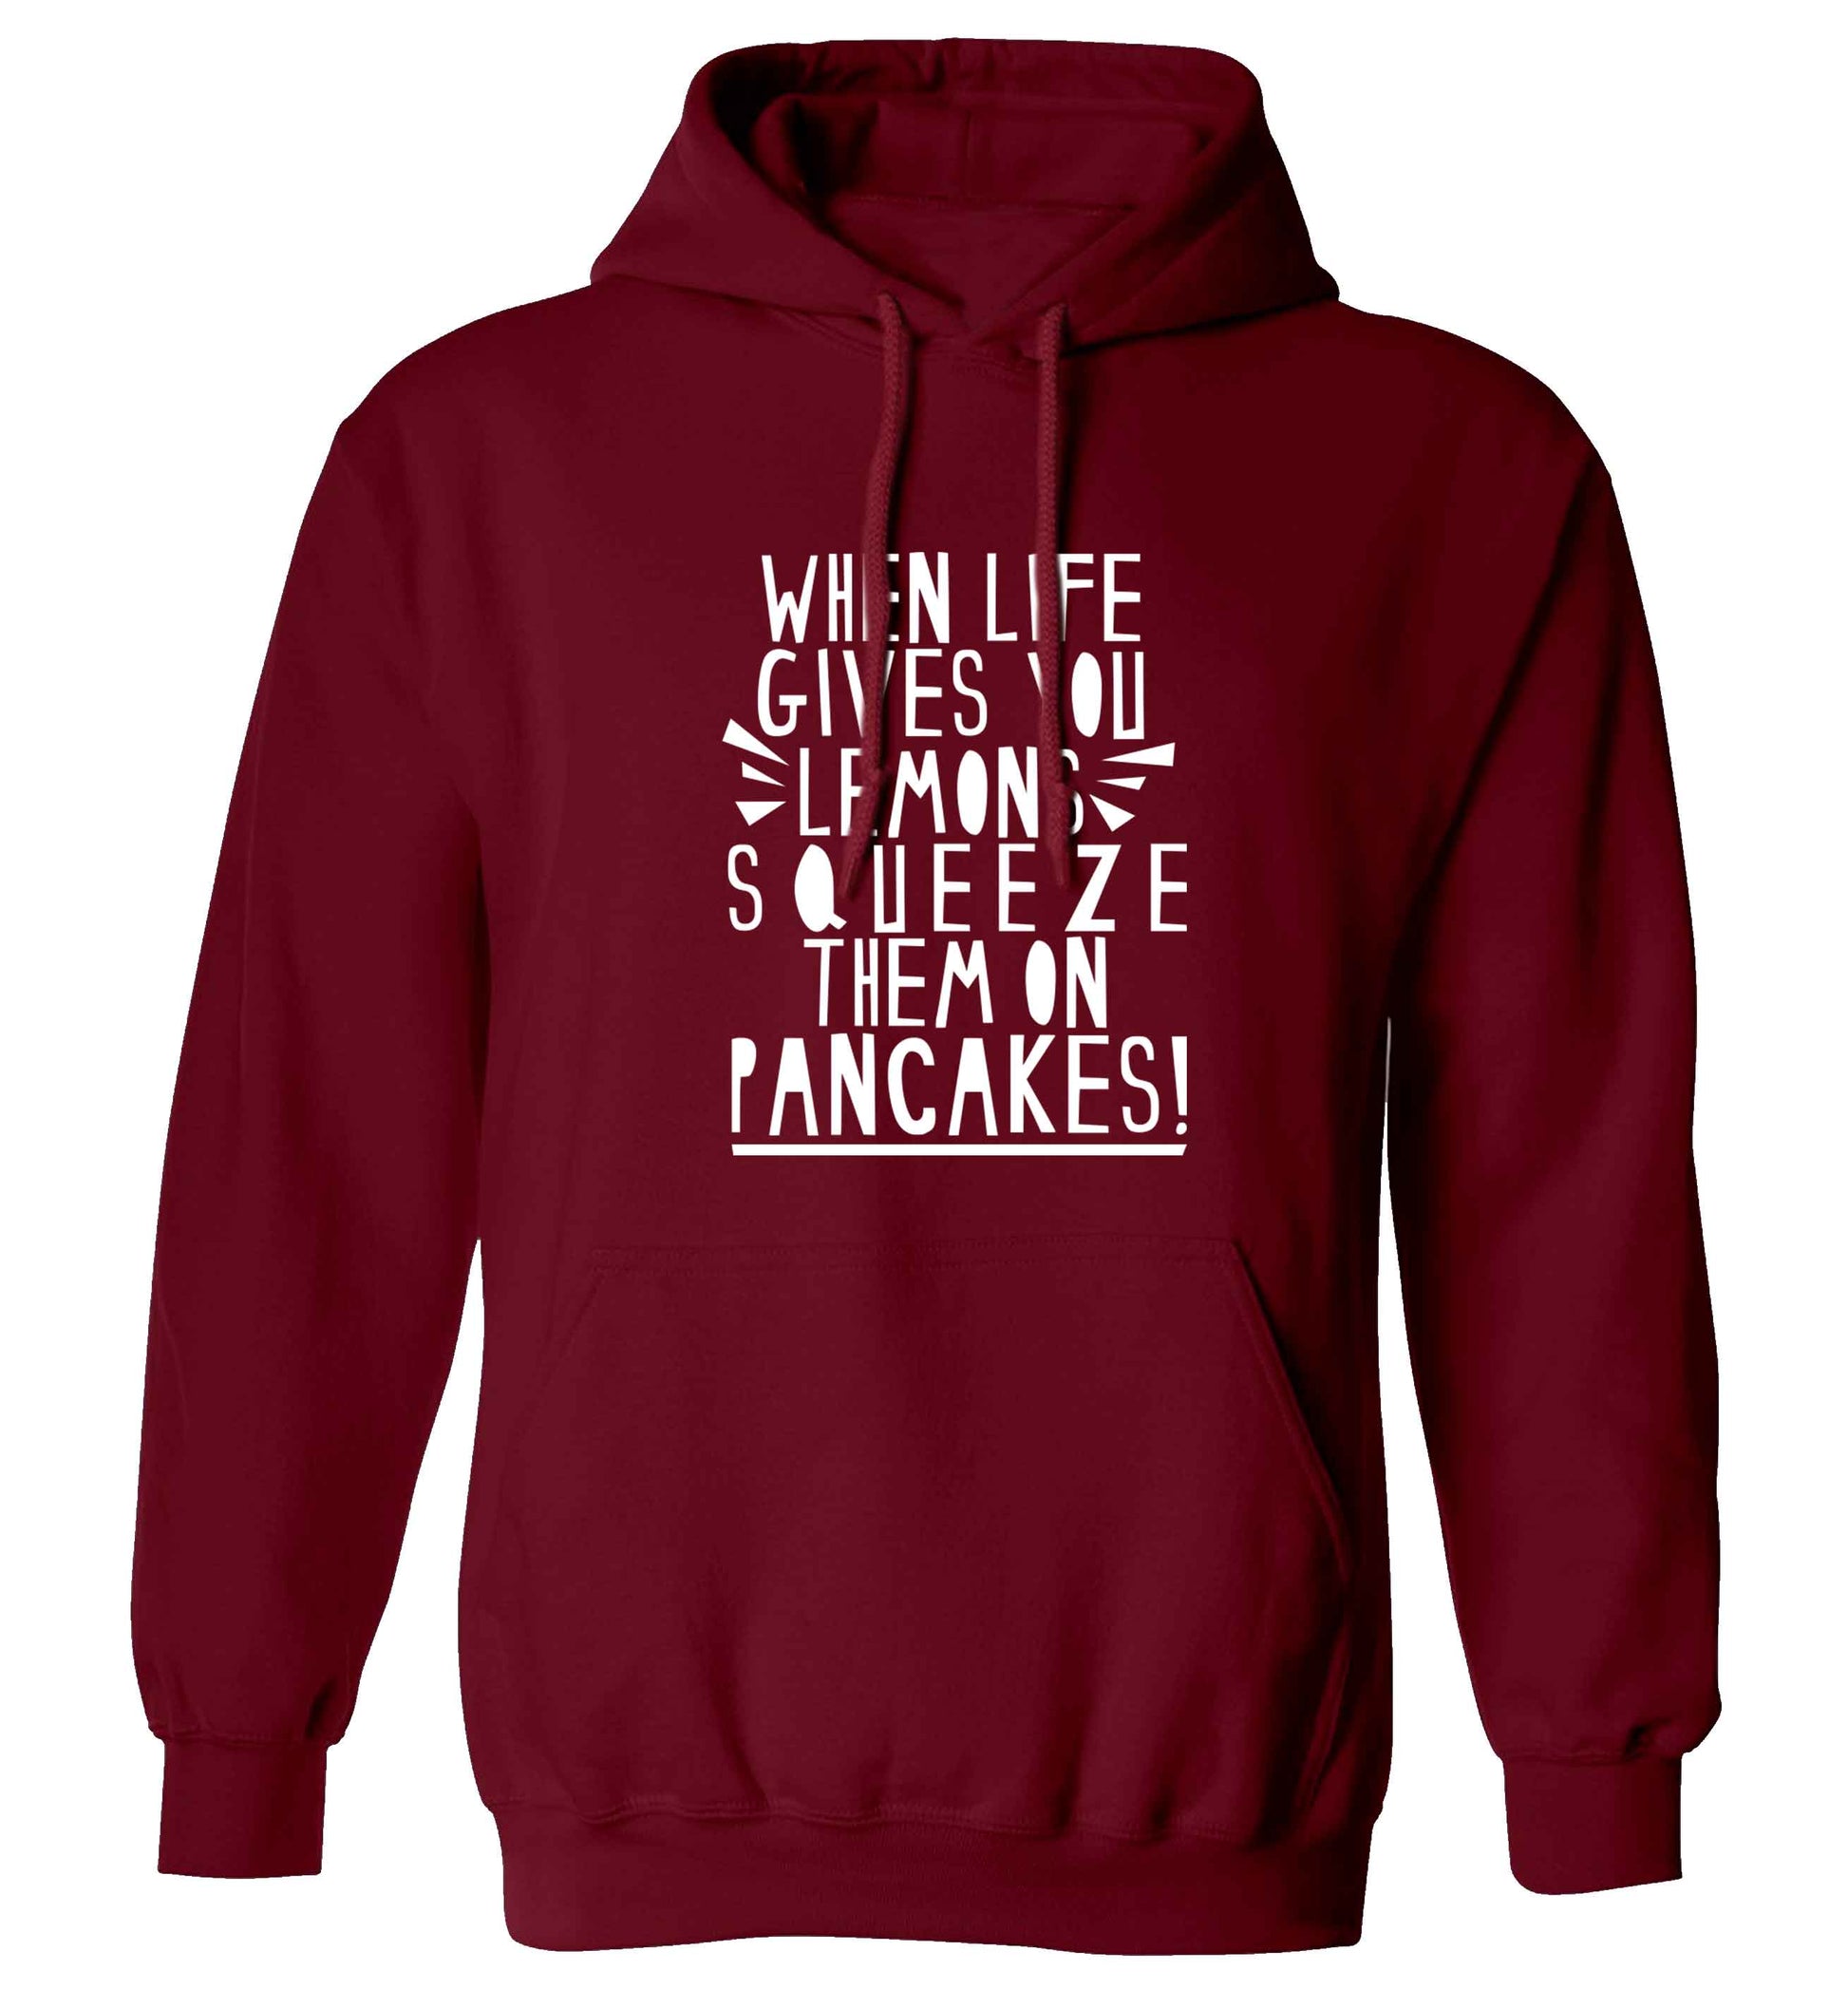 When life gives you lemons squeeze them on pancakes! adults unisex maroon hoodie 2XL